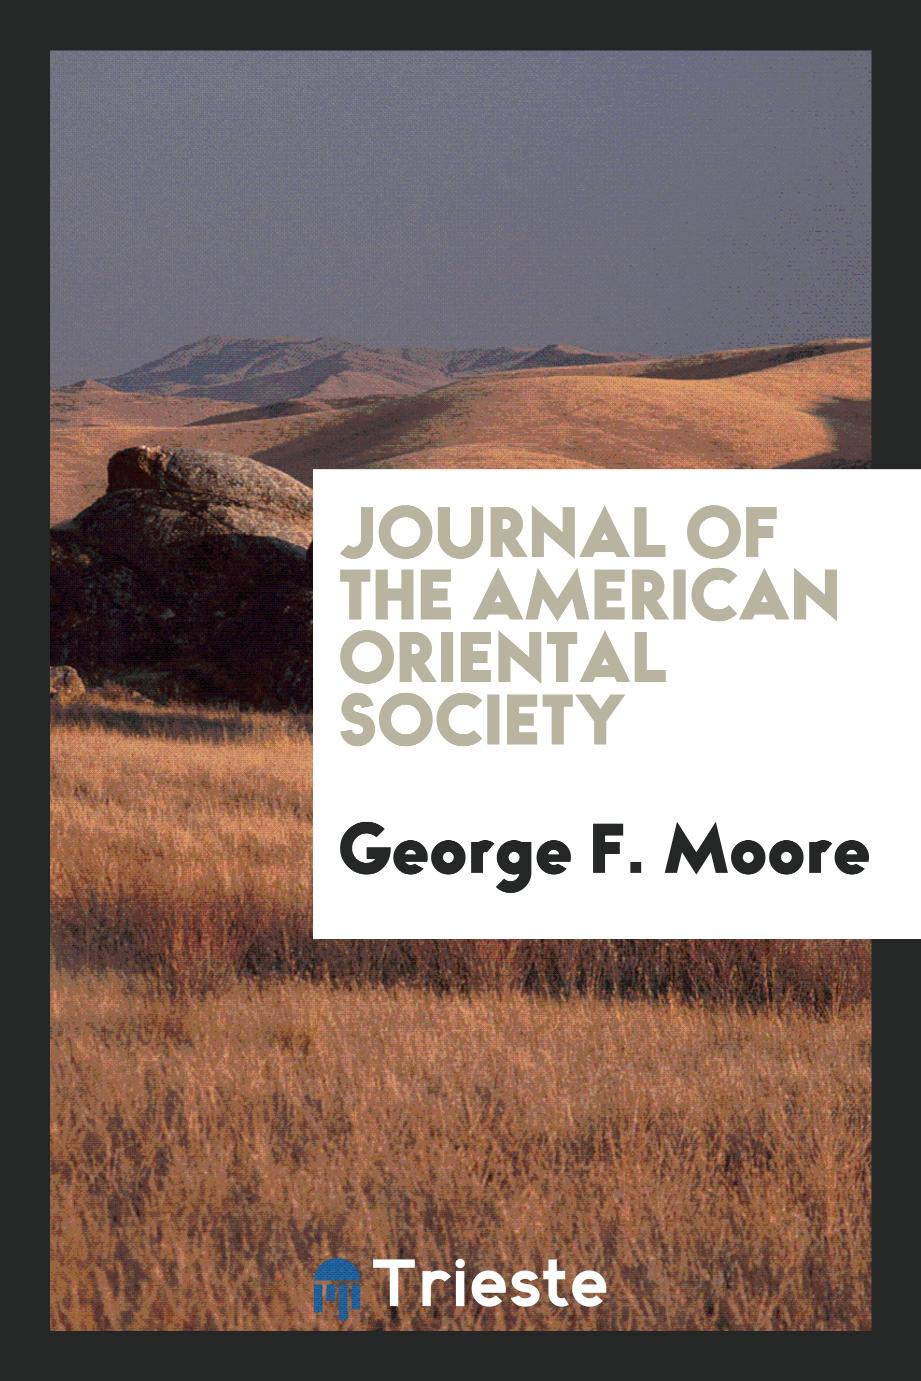 Journal of the American Oriental Society